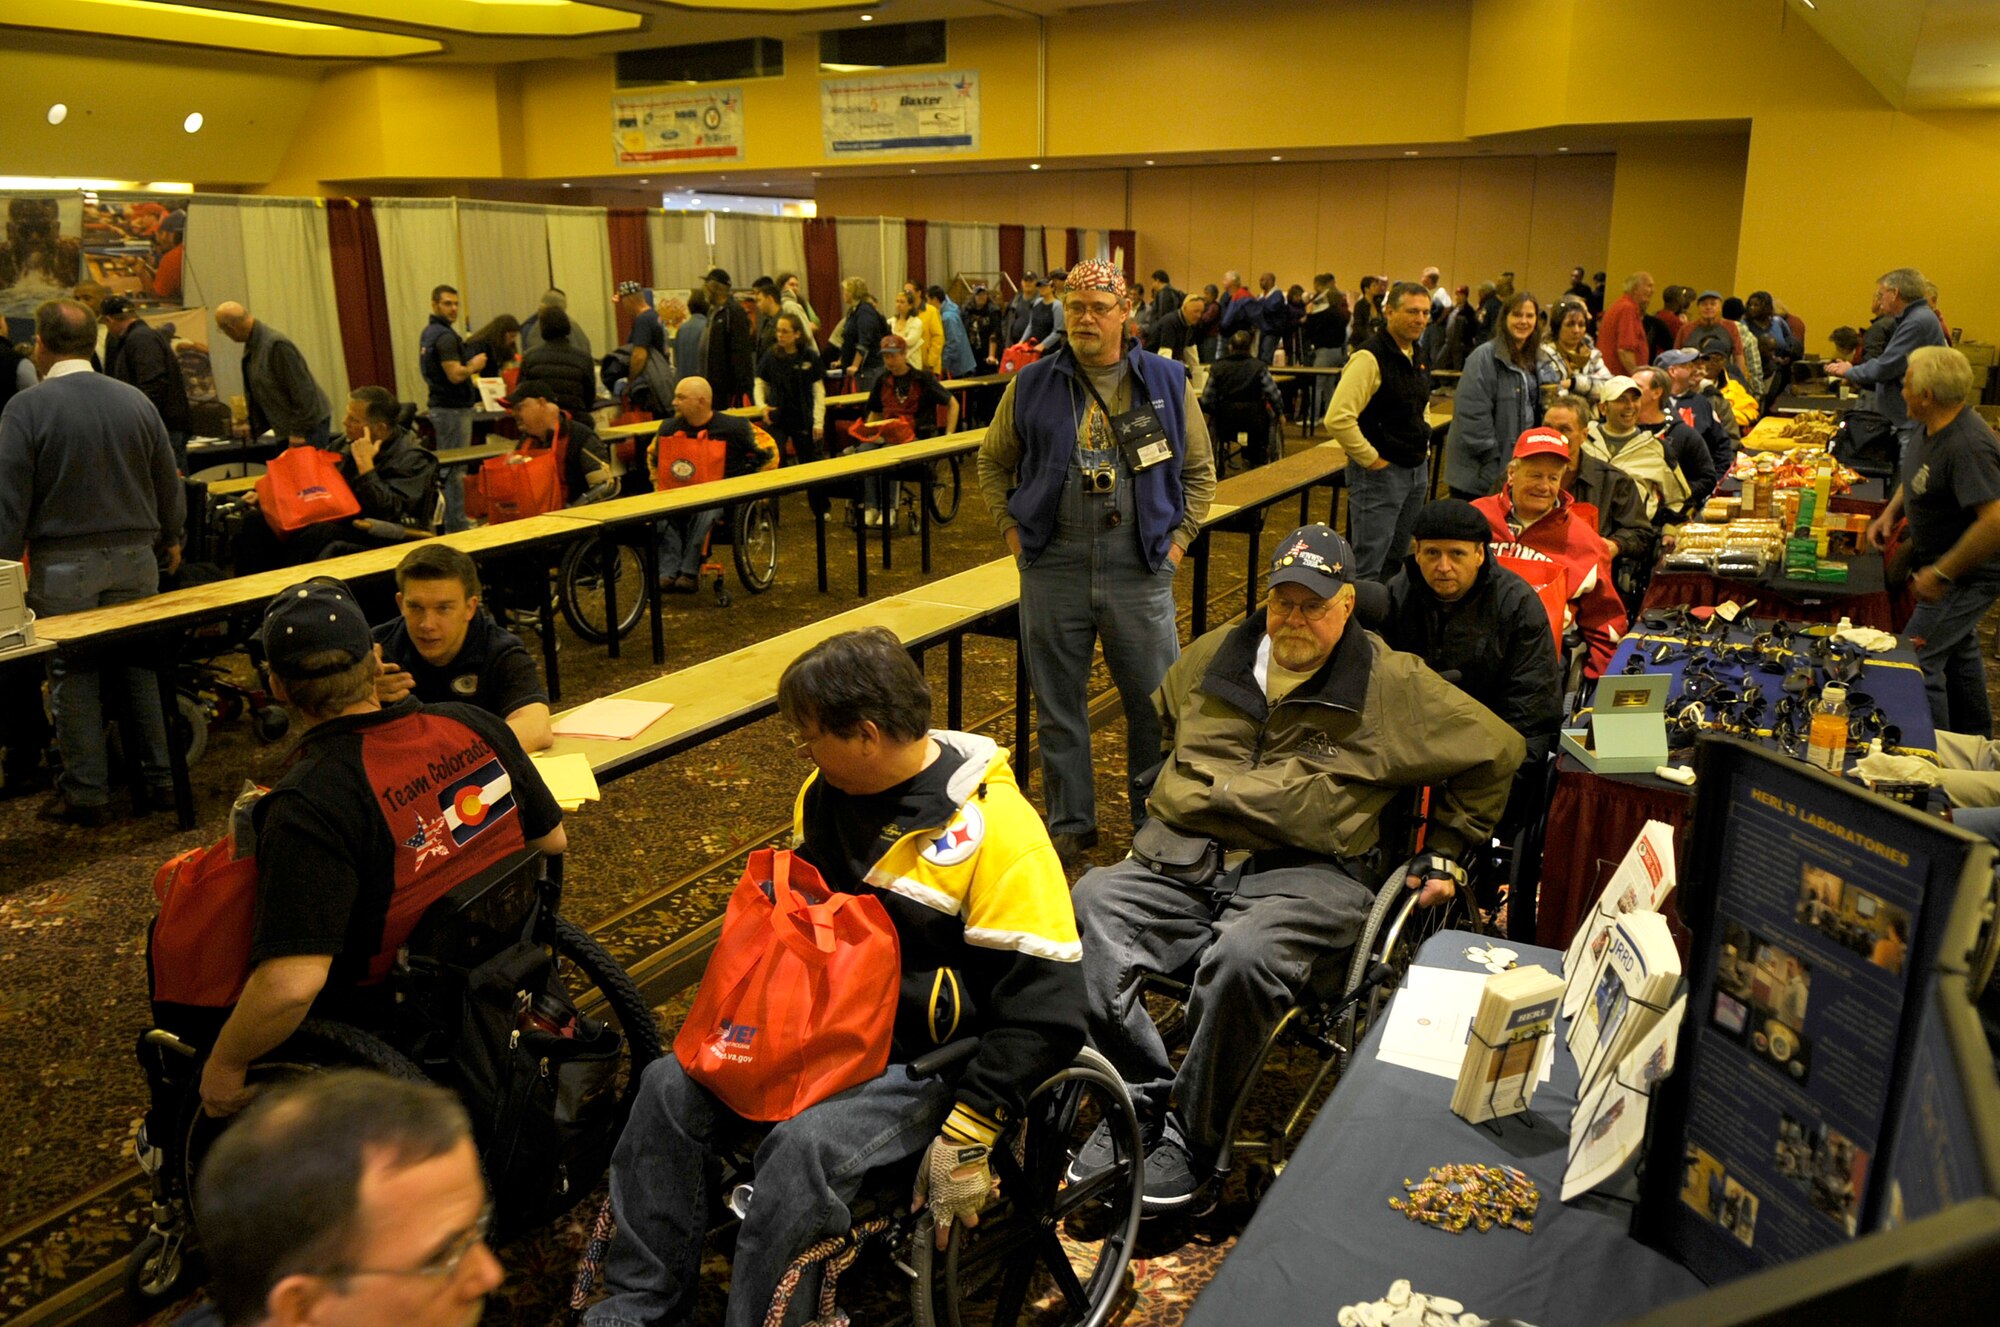 Participants line up inside The Silver Tree Hotel March 29 to register for the 23rd National Disabled American Veterans Winter Sports Clinic in Snowmass Village, Colo. The event is sponsored by the Department of Veterans Affairs and Disabled American Veterans. (U.S. Air Force photo/Staff Sgt. Desiree N. Palacios)